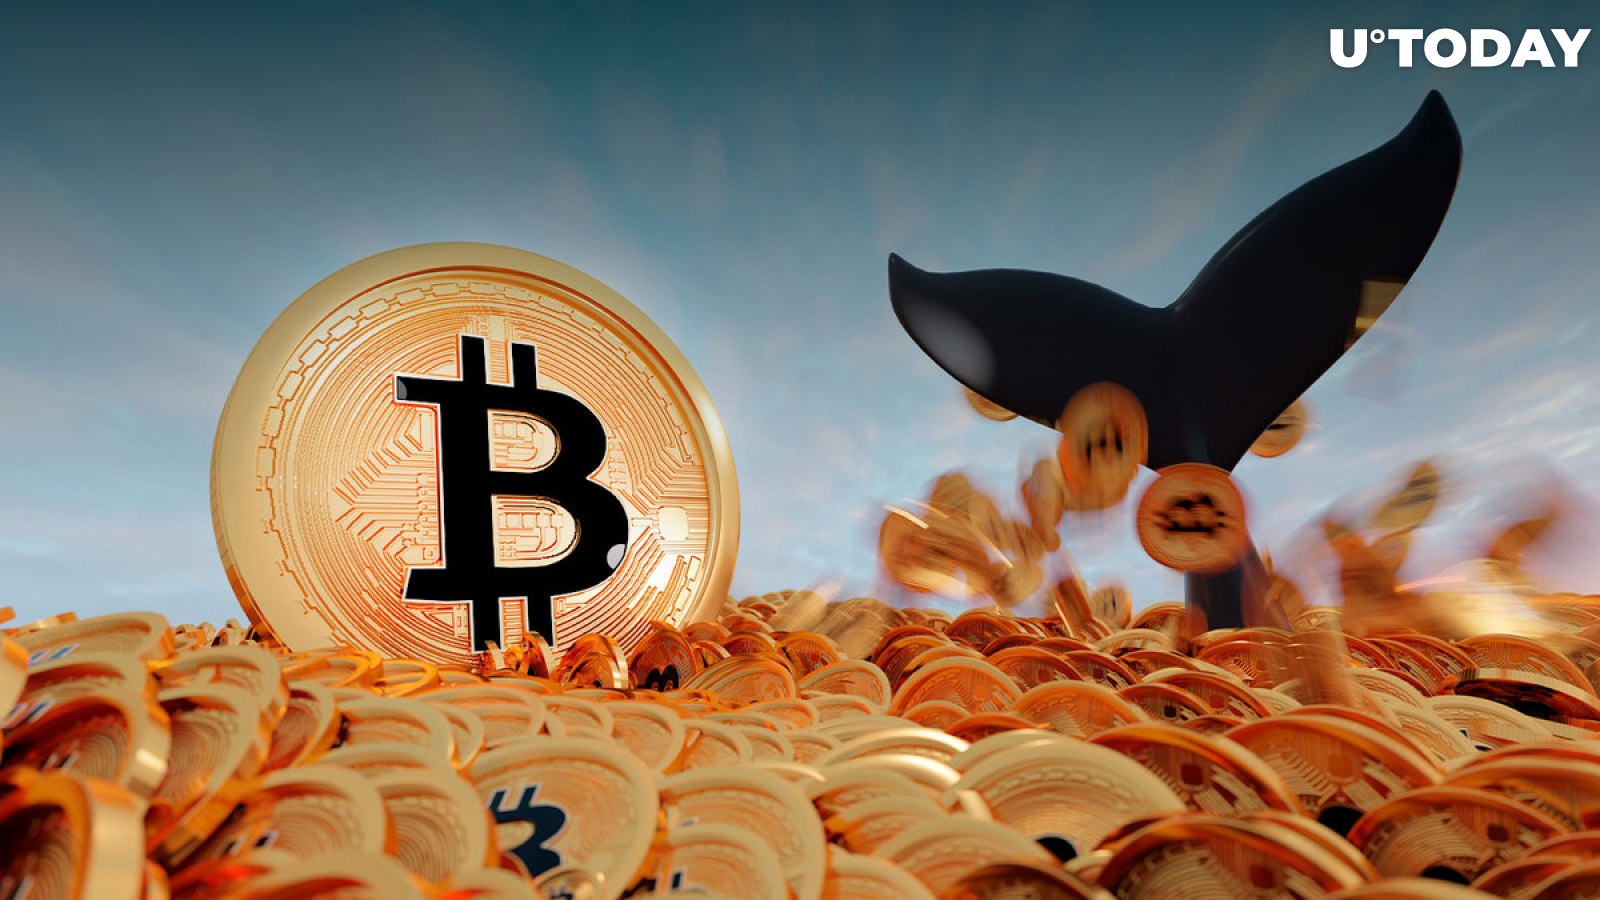 Bitcoin Whales Number Reaches New Local High, and Reason Might Be Simple